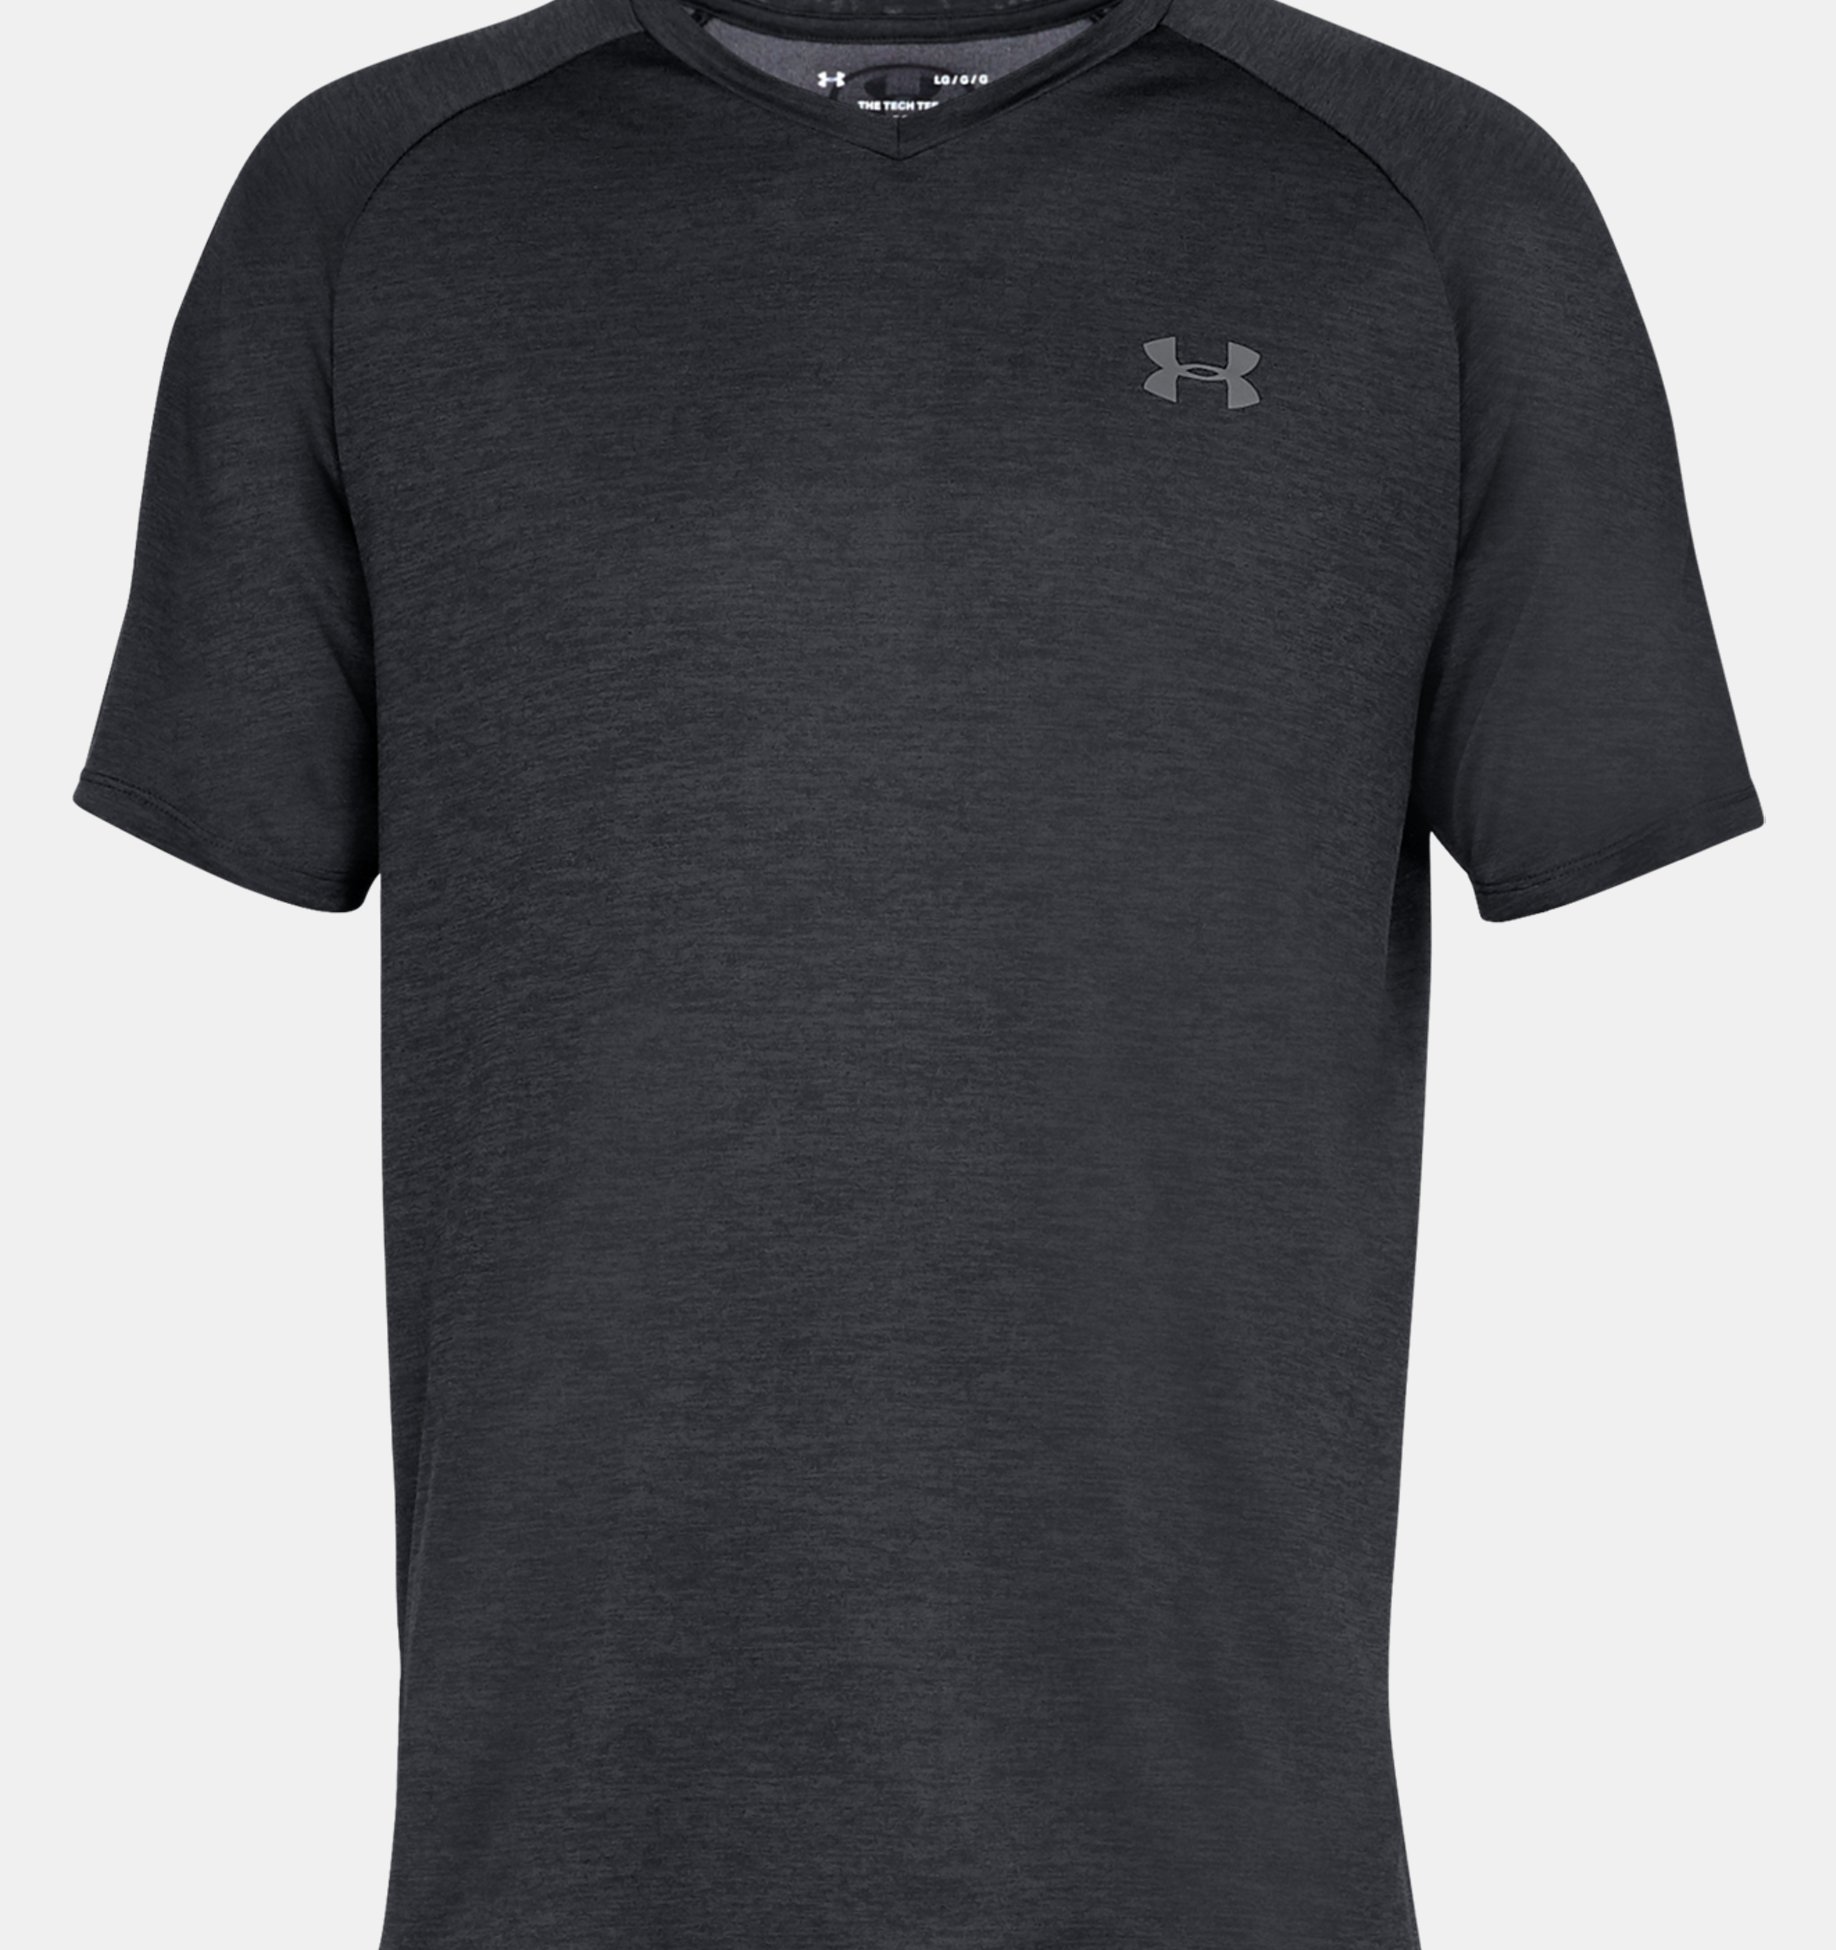 Under Armour Men's Sportstyle core v Neck tee 